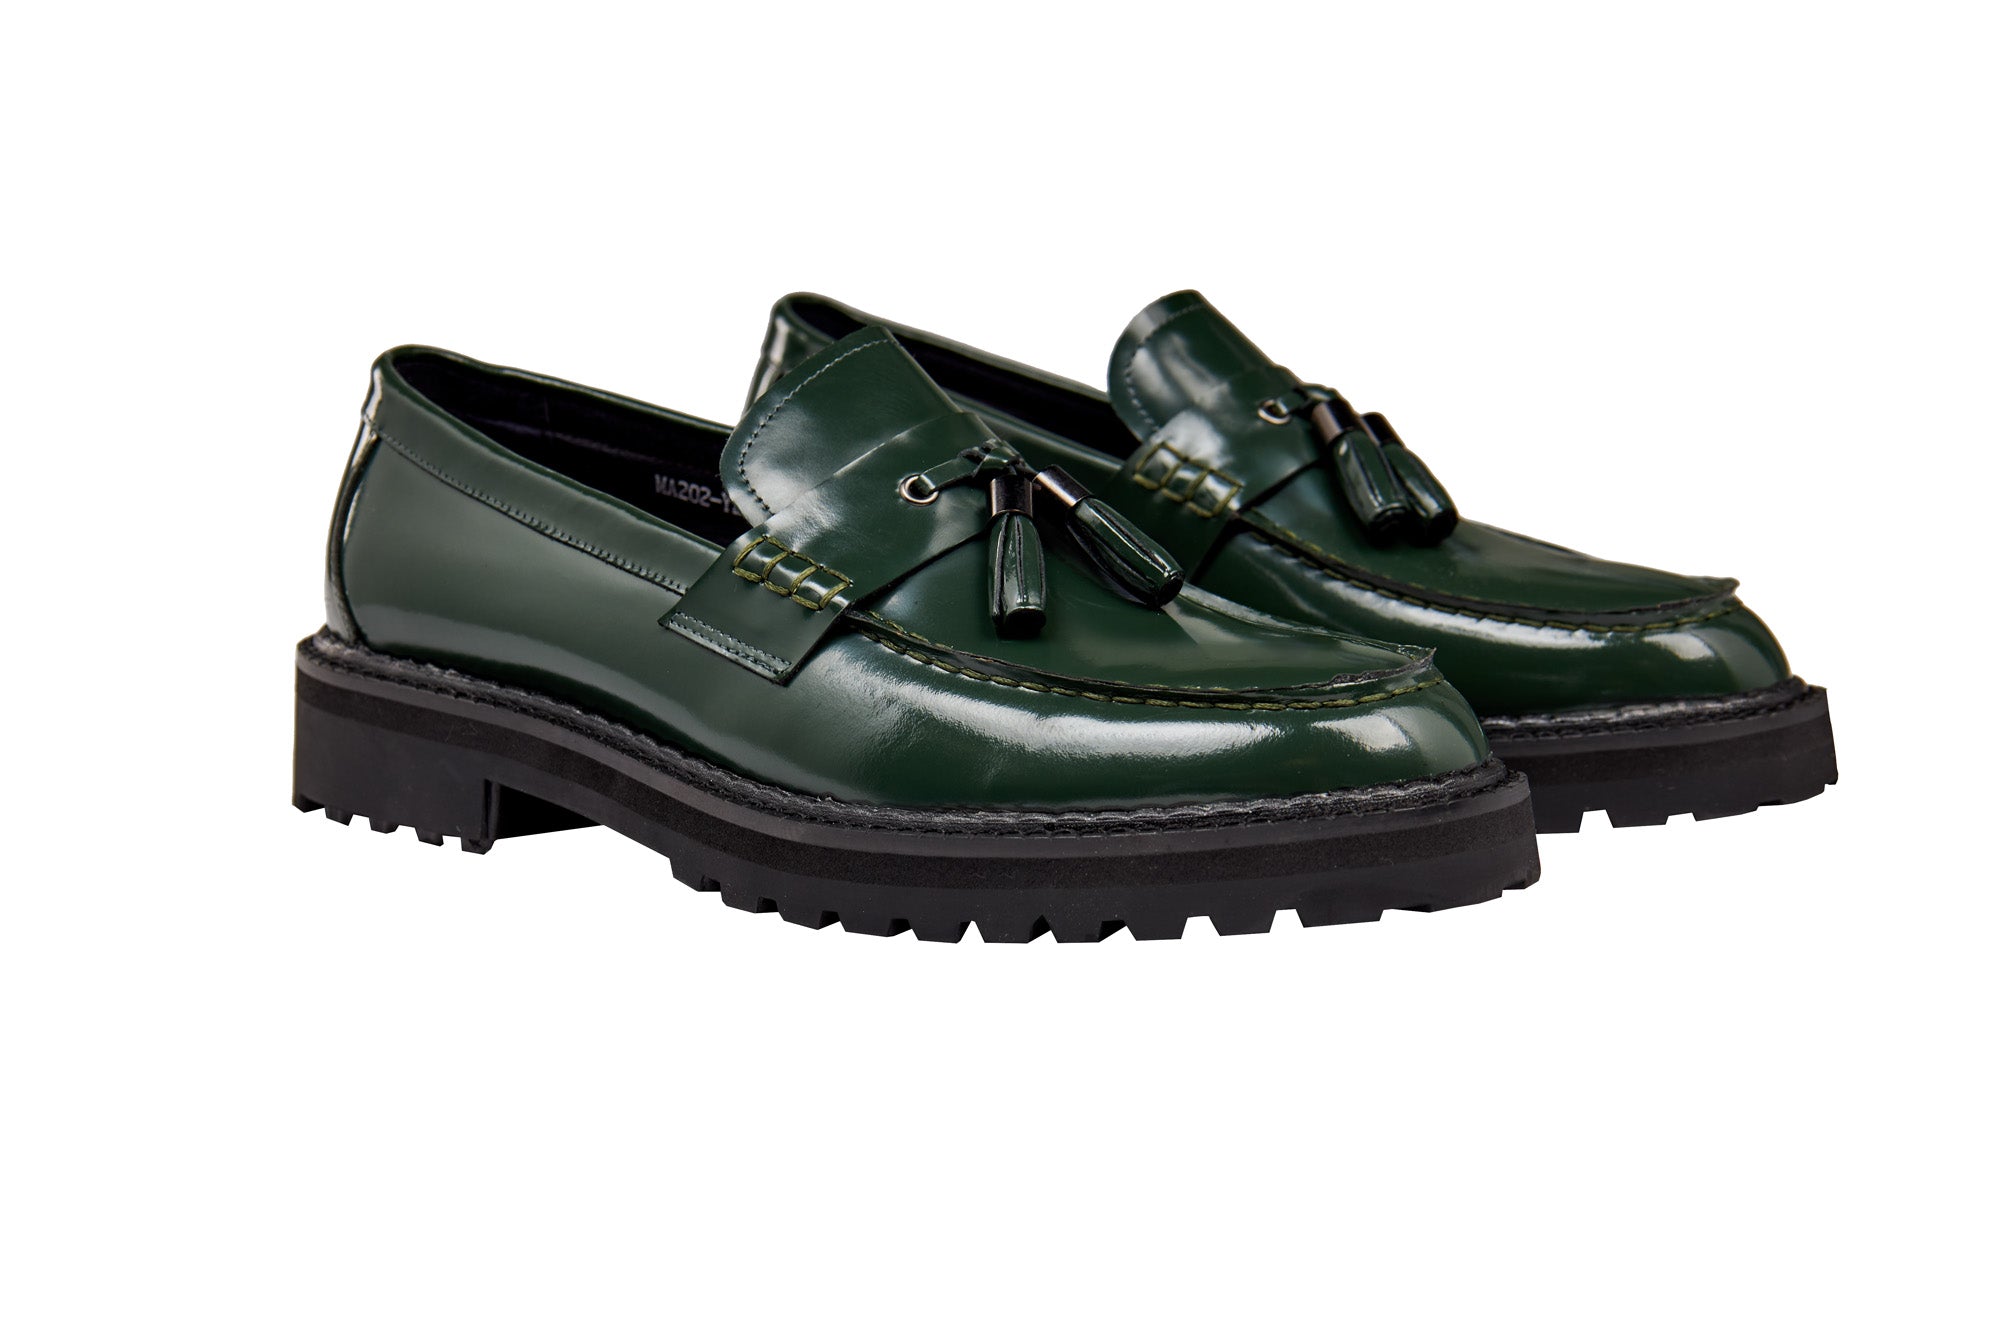 GREEN PATENT LEATHER TASSEL LOAFERS